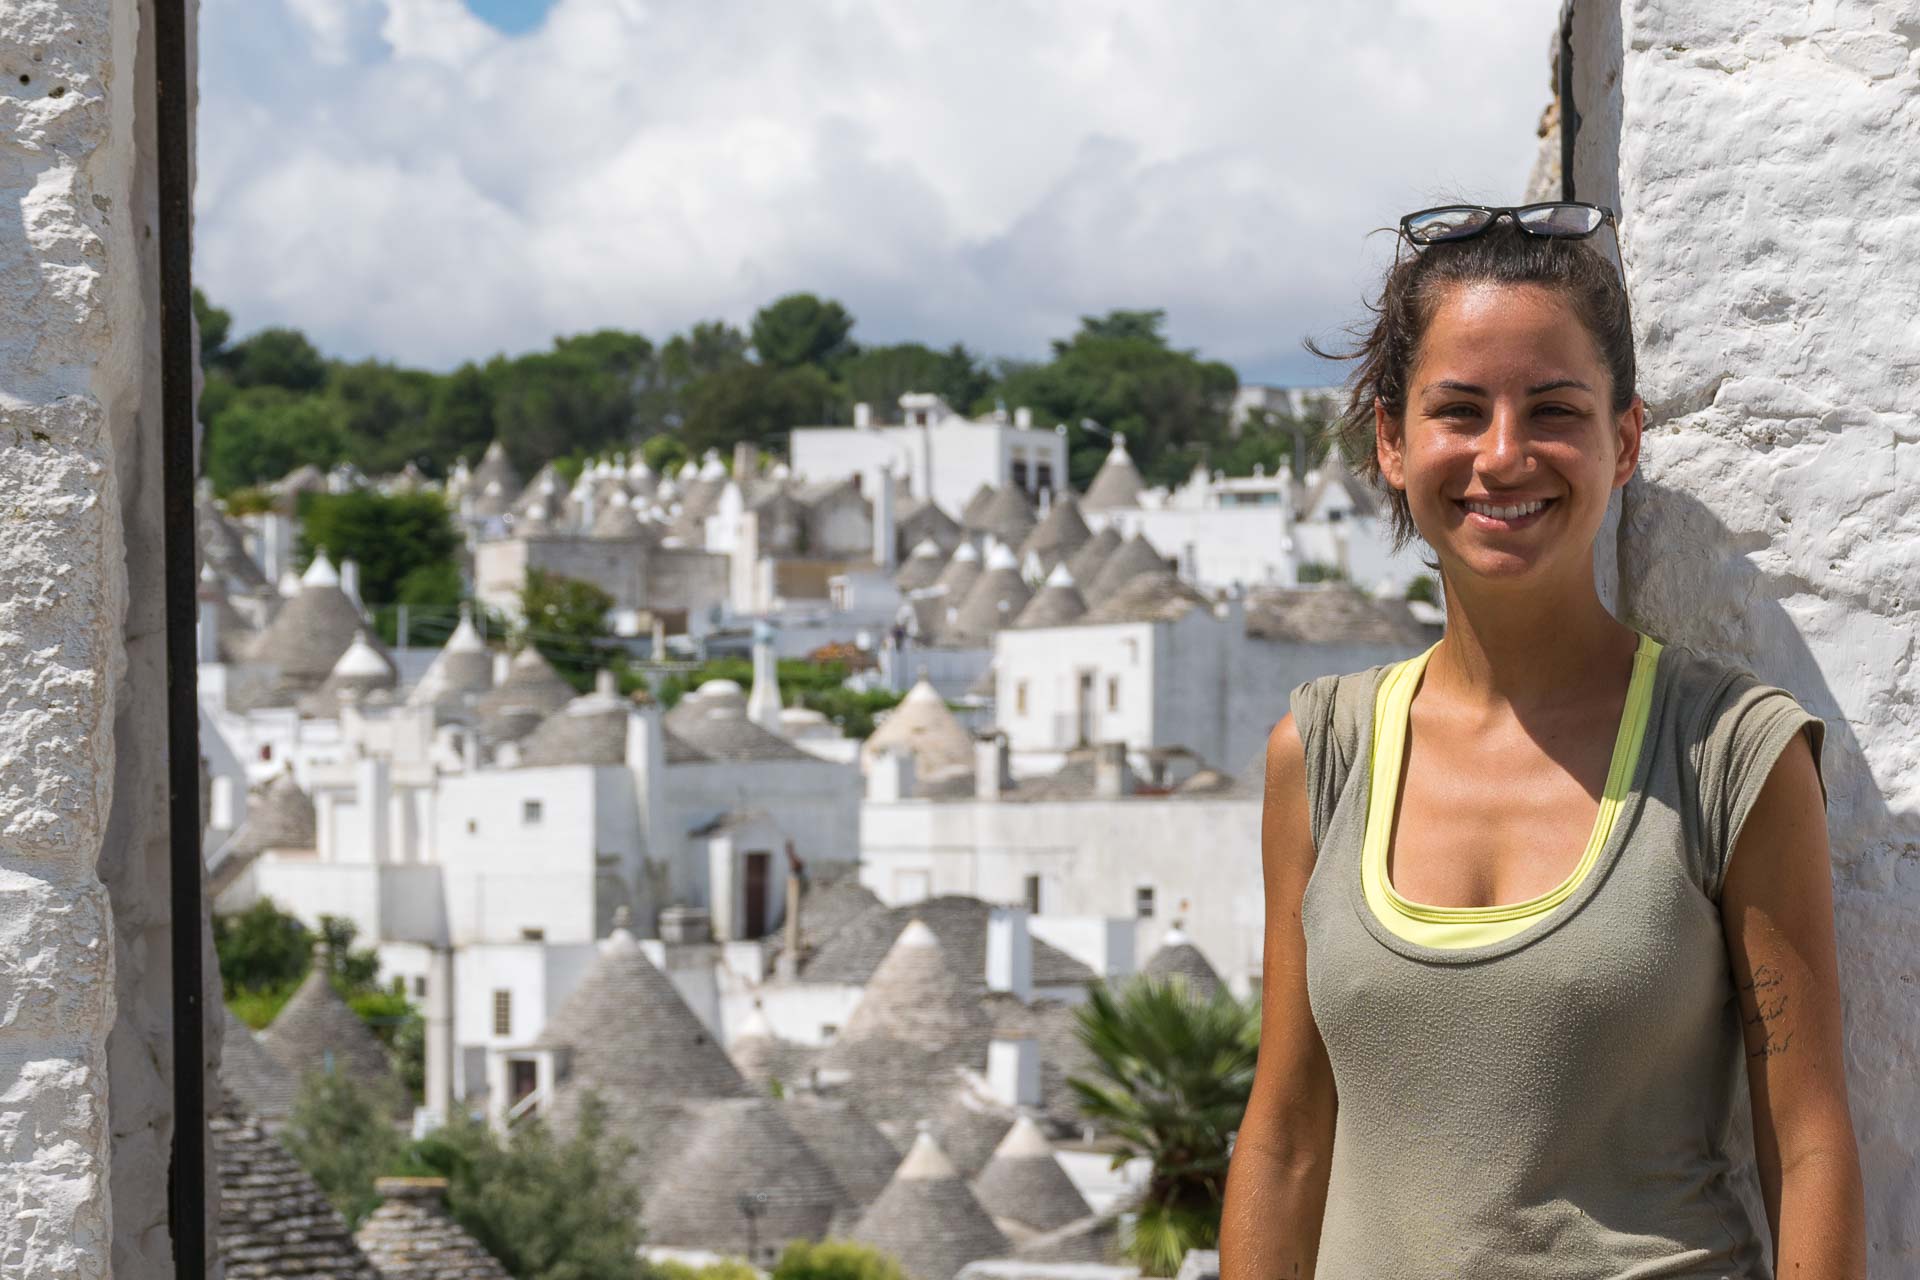 Fernanda in front of an arch showing all the trulli houses in alberobello italy